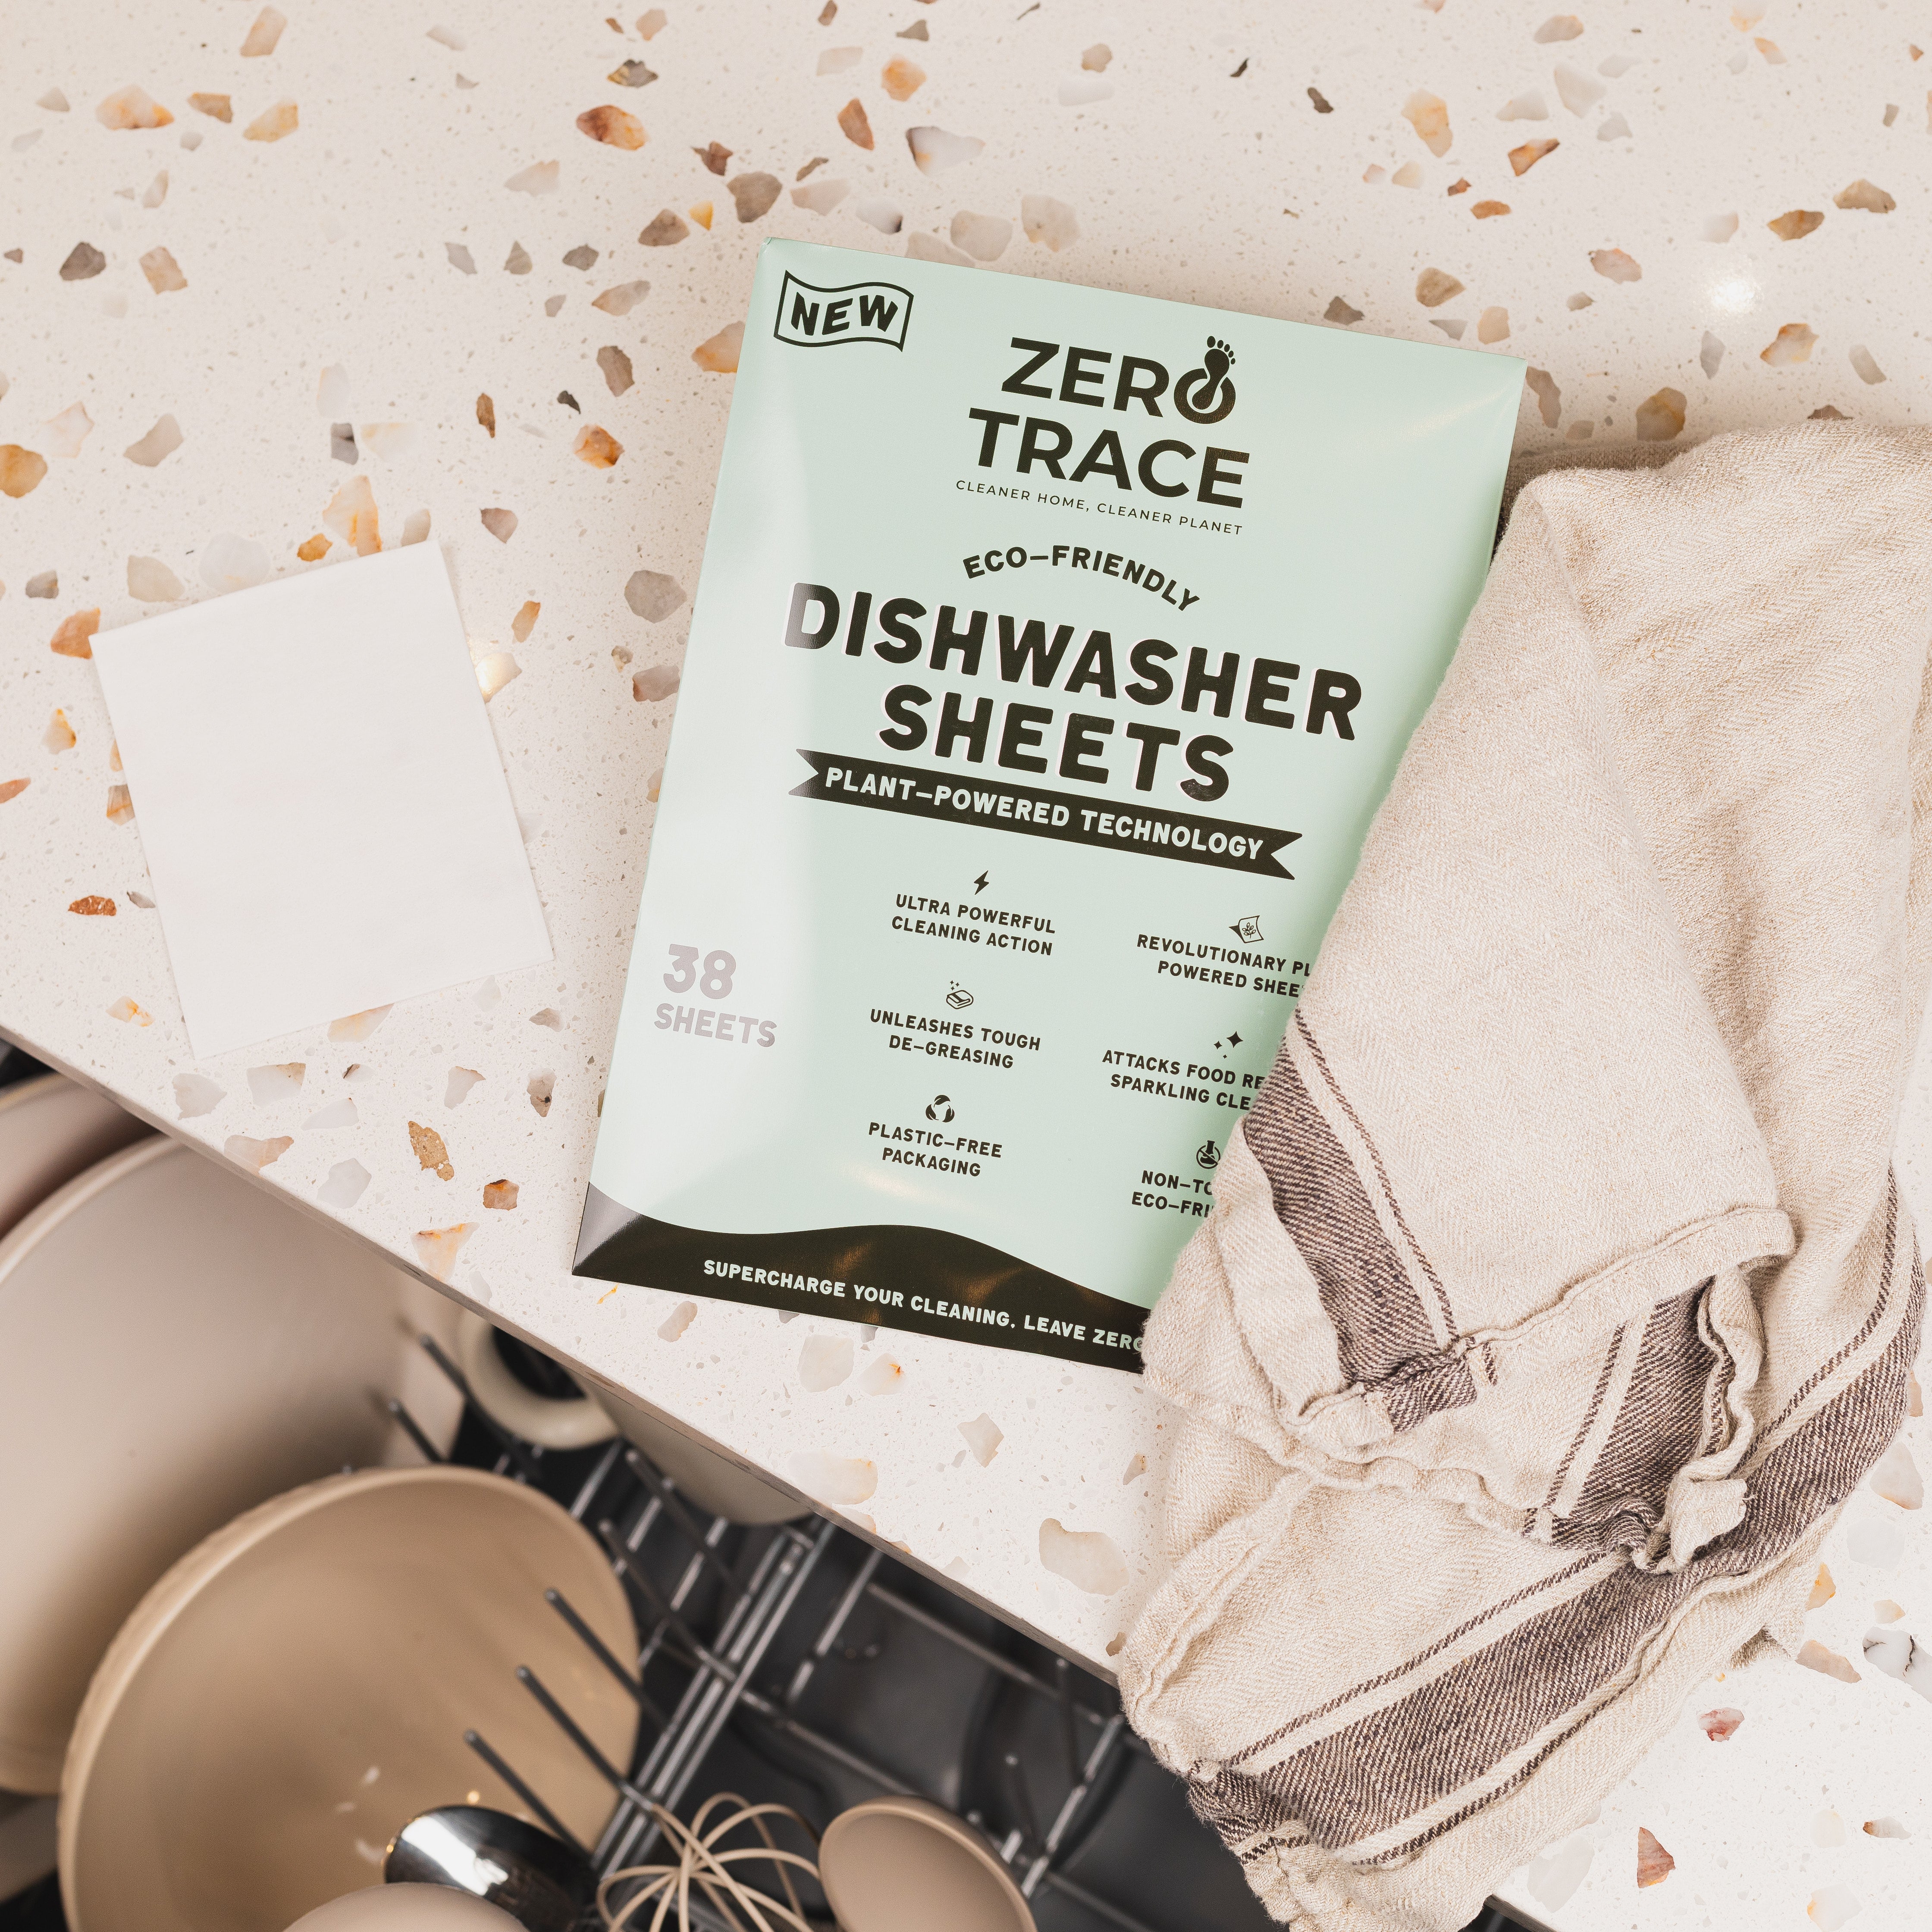 Introducing Zero Trace Dish Washer Sheets, the revolutionary solution for a spotless clean in your dishwasher. Simply insert these convenient sheets into your appliance and watch how they effortlessly eliminate all traces of residue and stains.